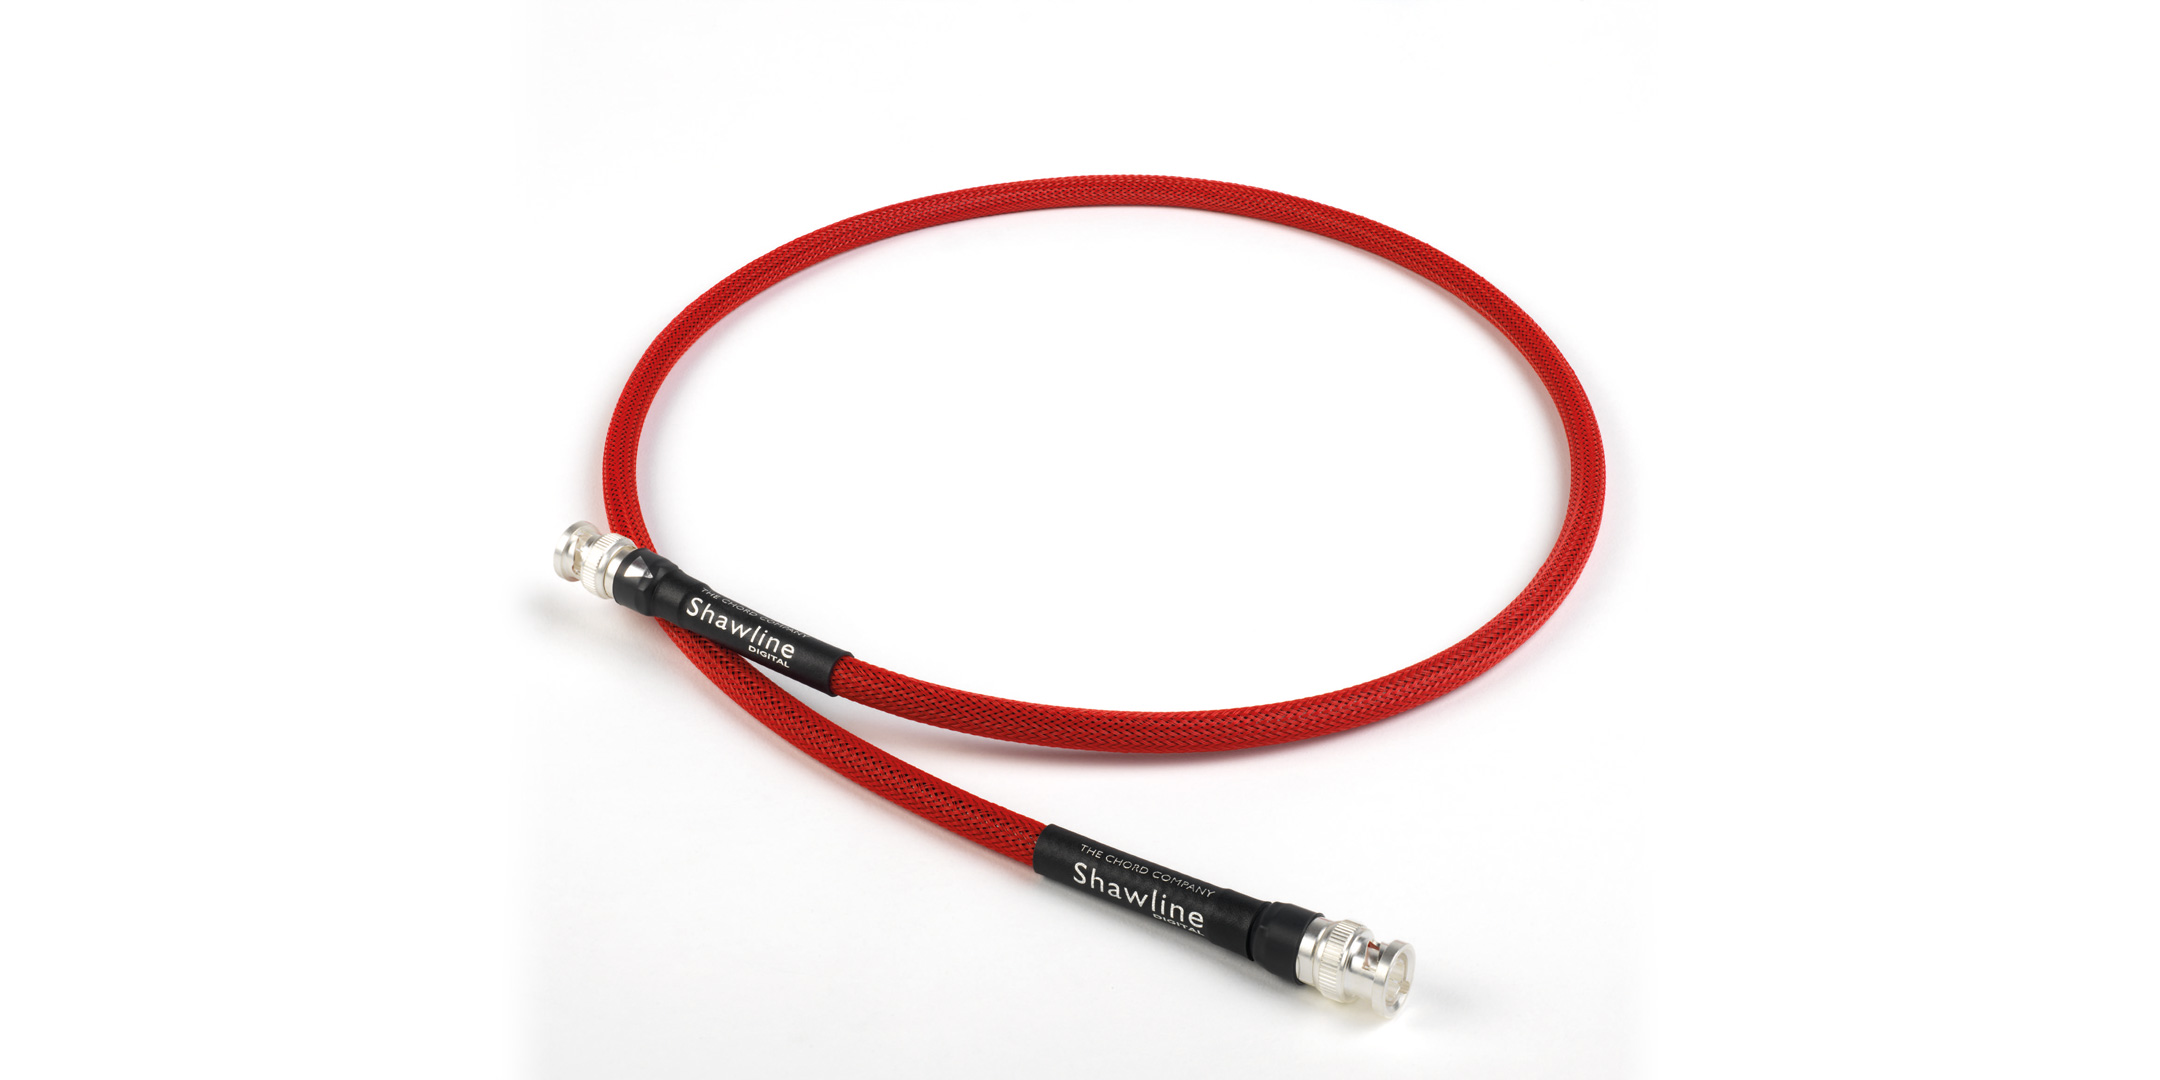 Pic of a Chord Shawline optical cable on a white background